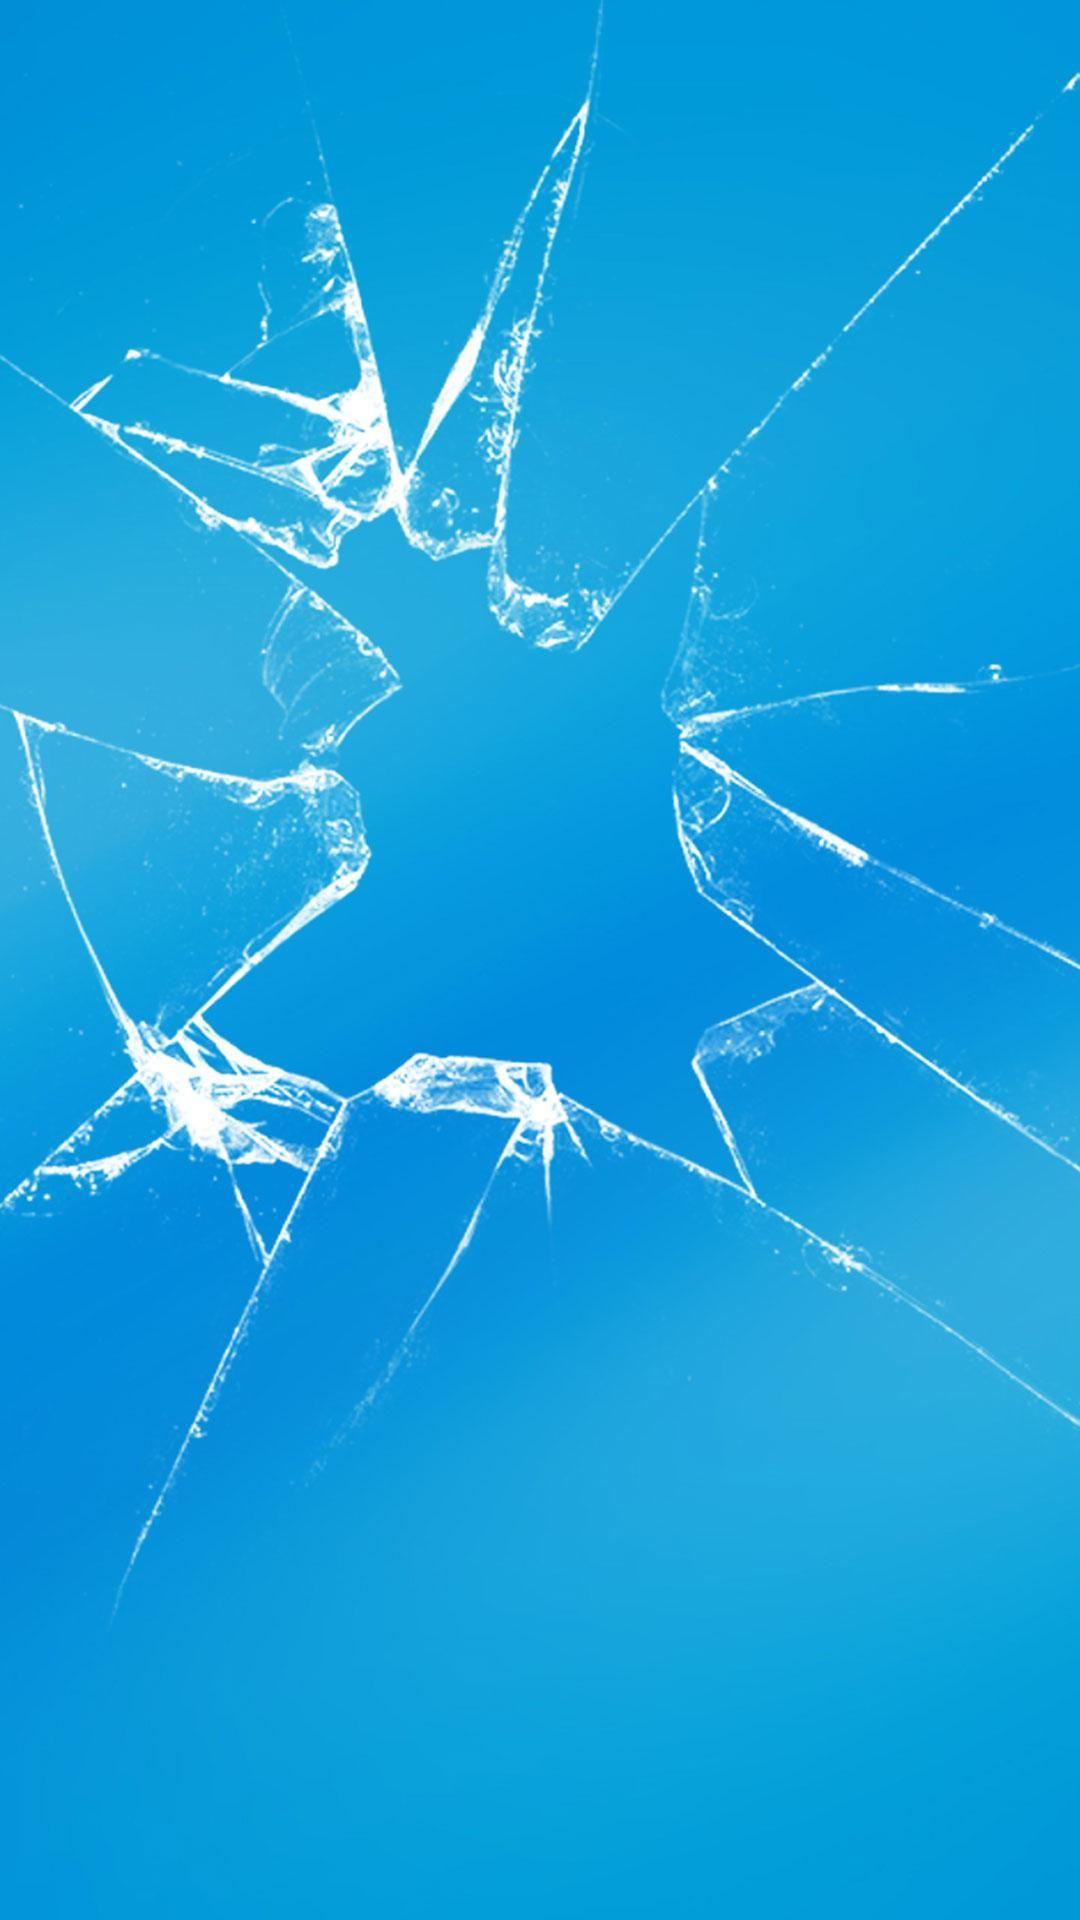 April Fools: The Broken Screen Wallpaper Prank for iPhone, iPad, Android |  OSXDaily